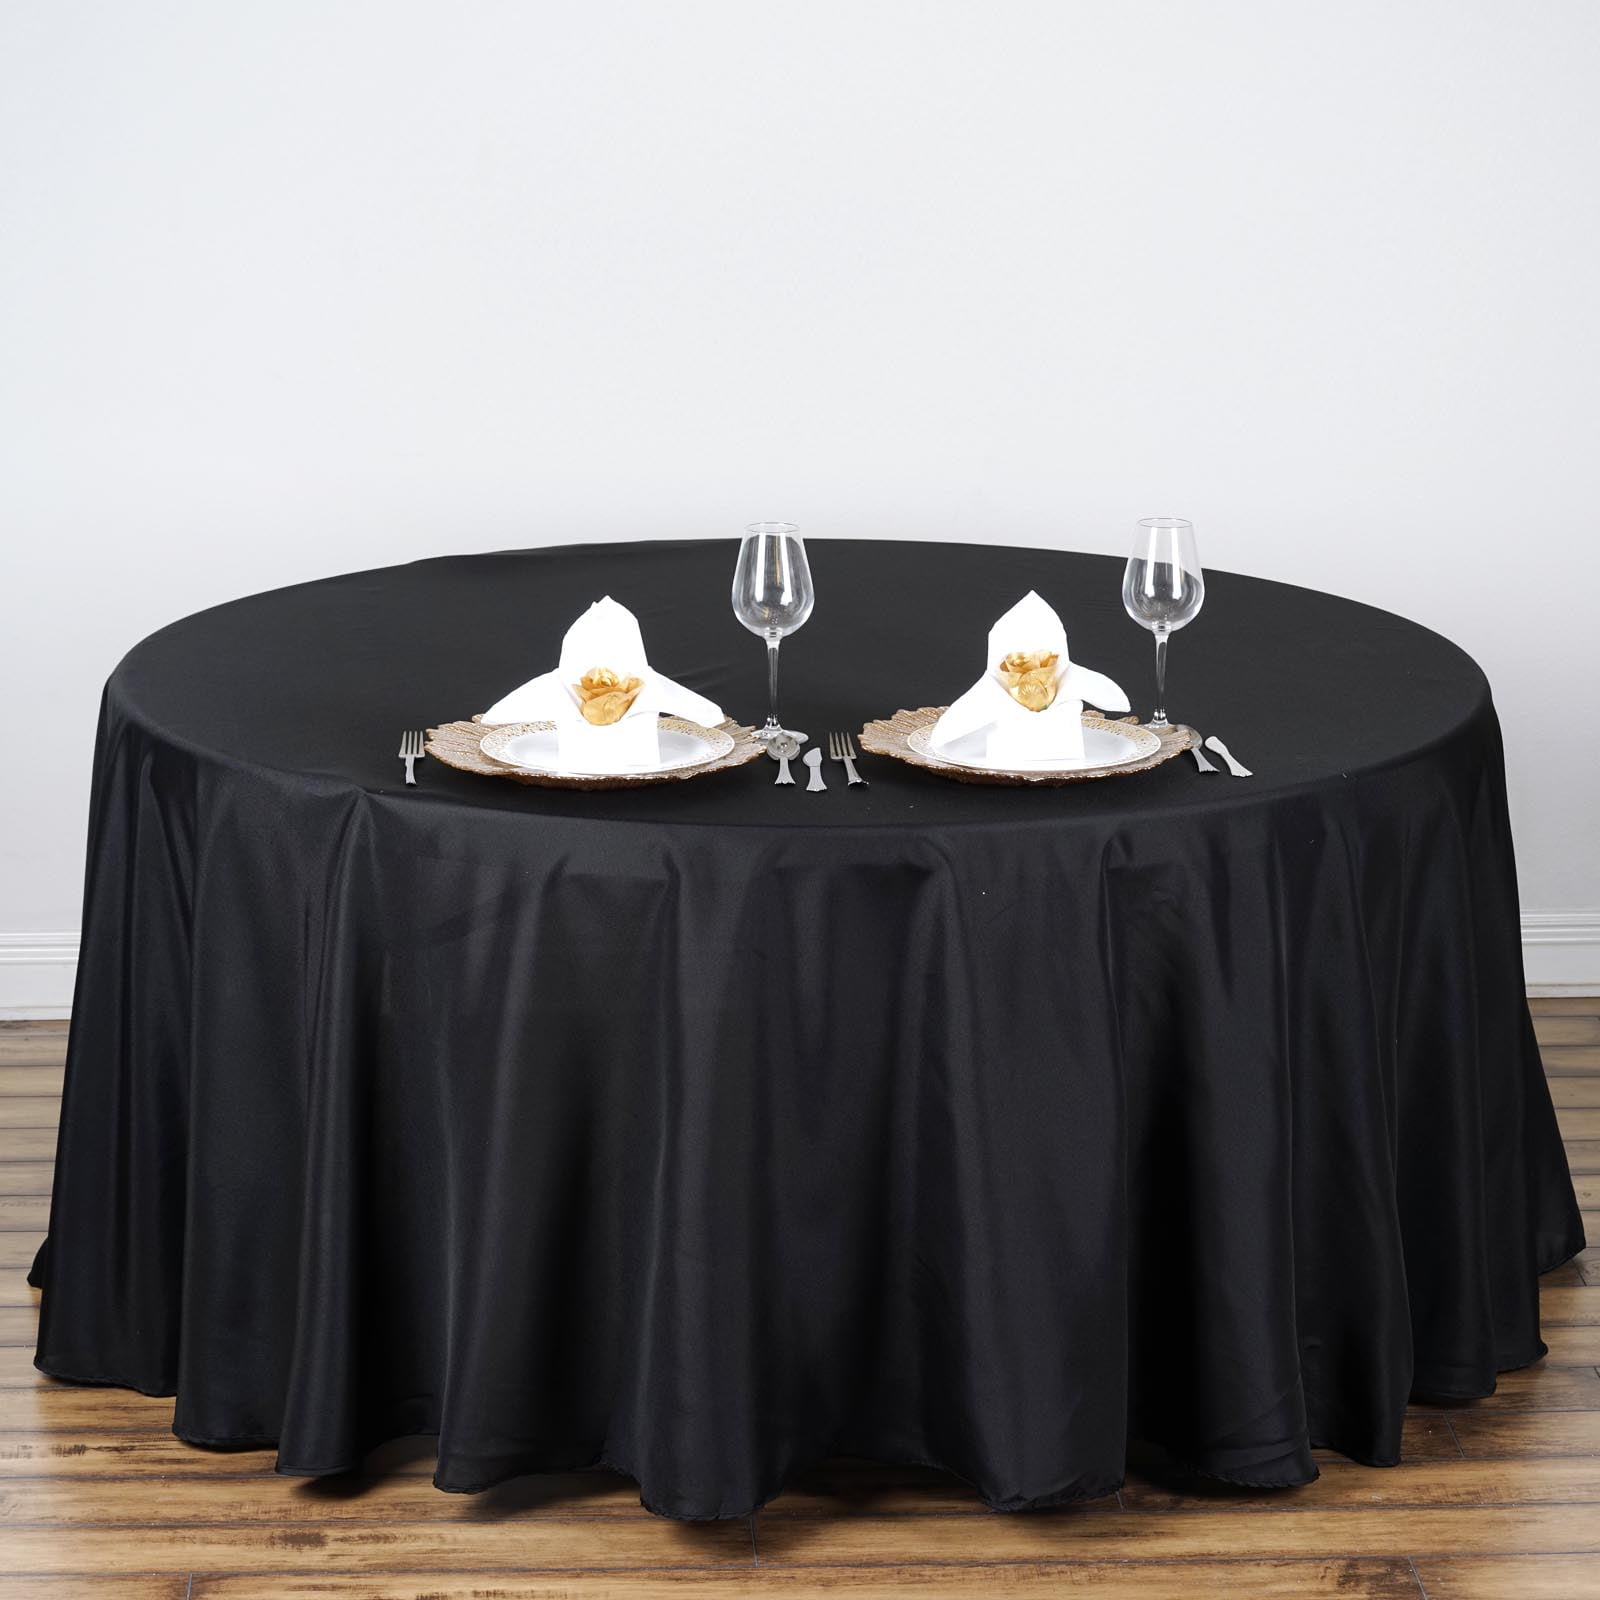 5 BLACK 108" ROUND POLYESTER TABLECLOTHS Wedding Affordable Tabletop Supplies 